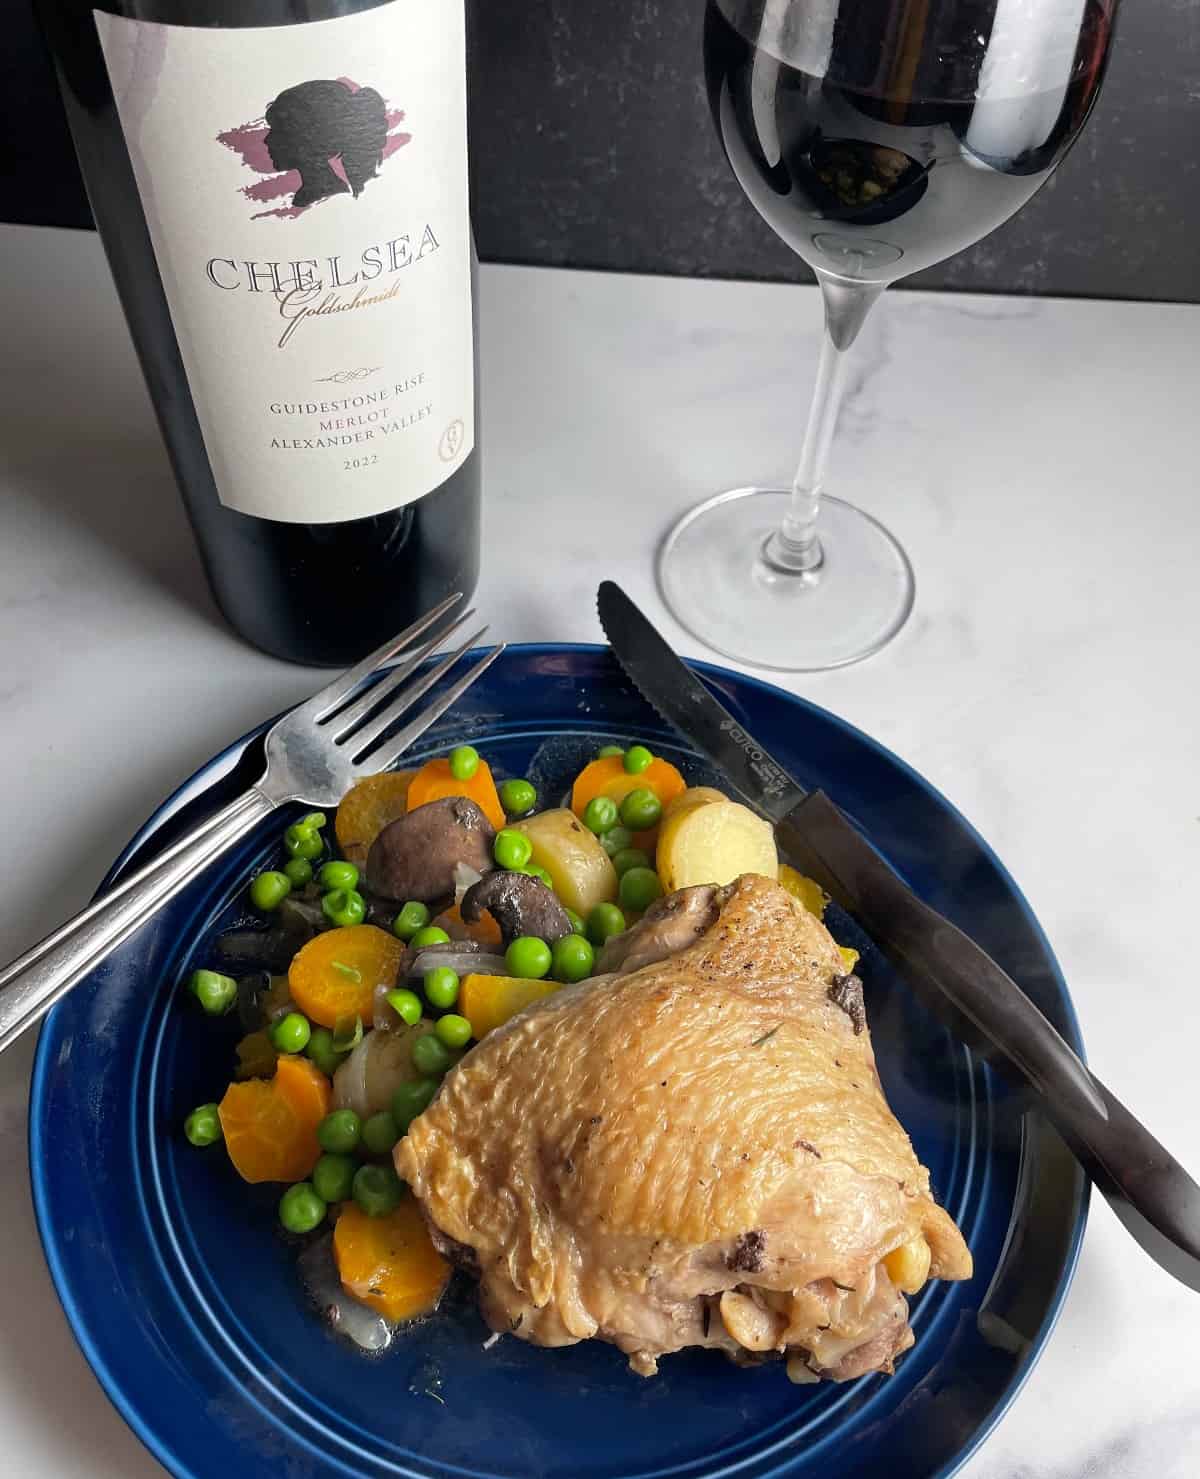 braised chicken thigh served with vegetables and a bottle of Merlot red wine.